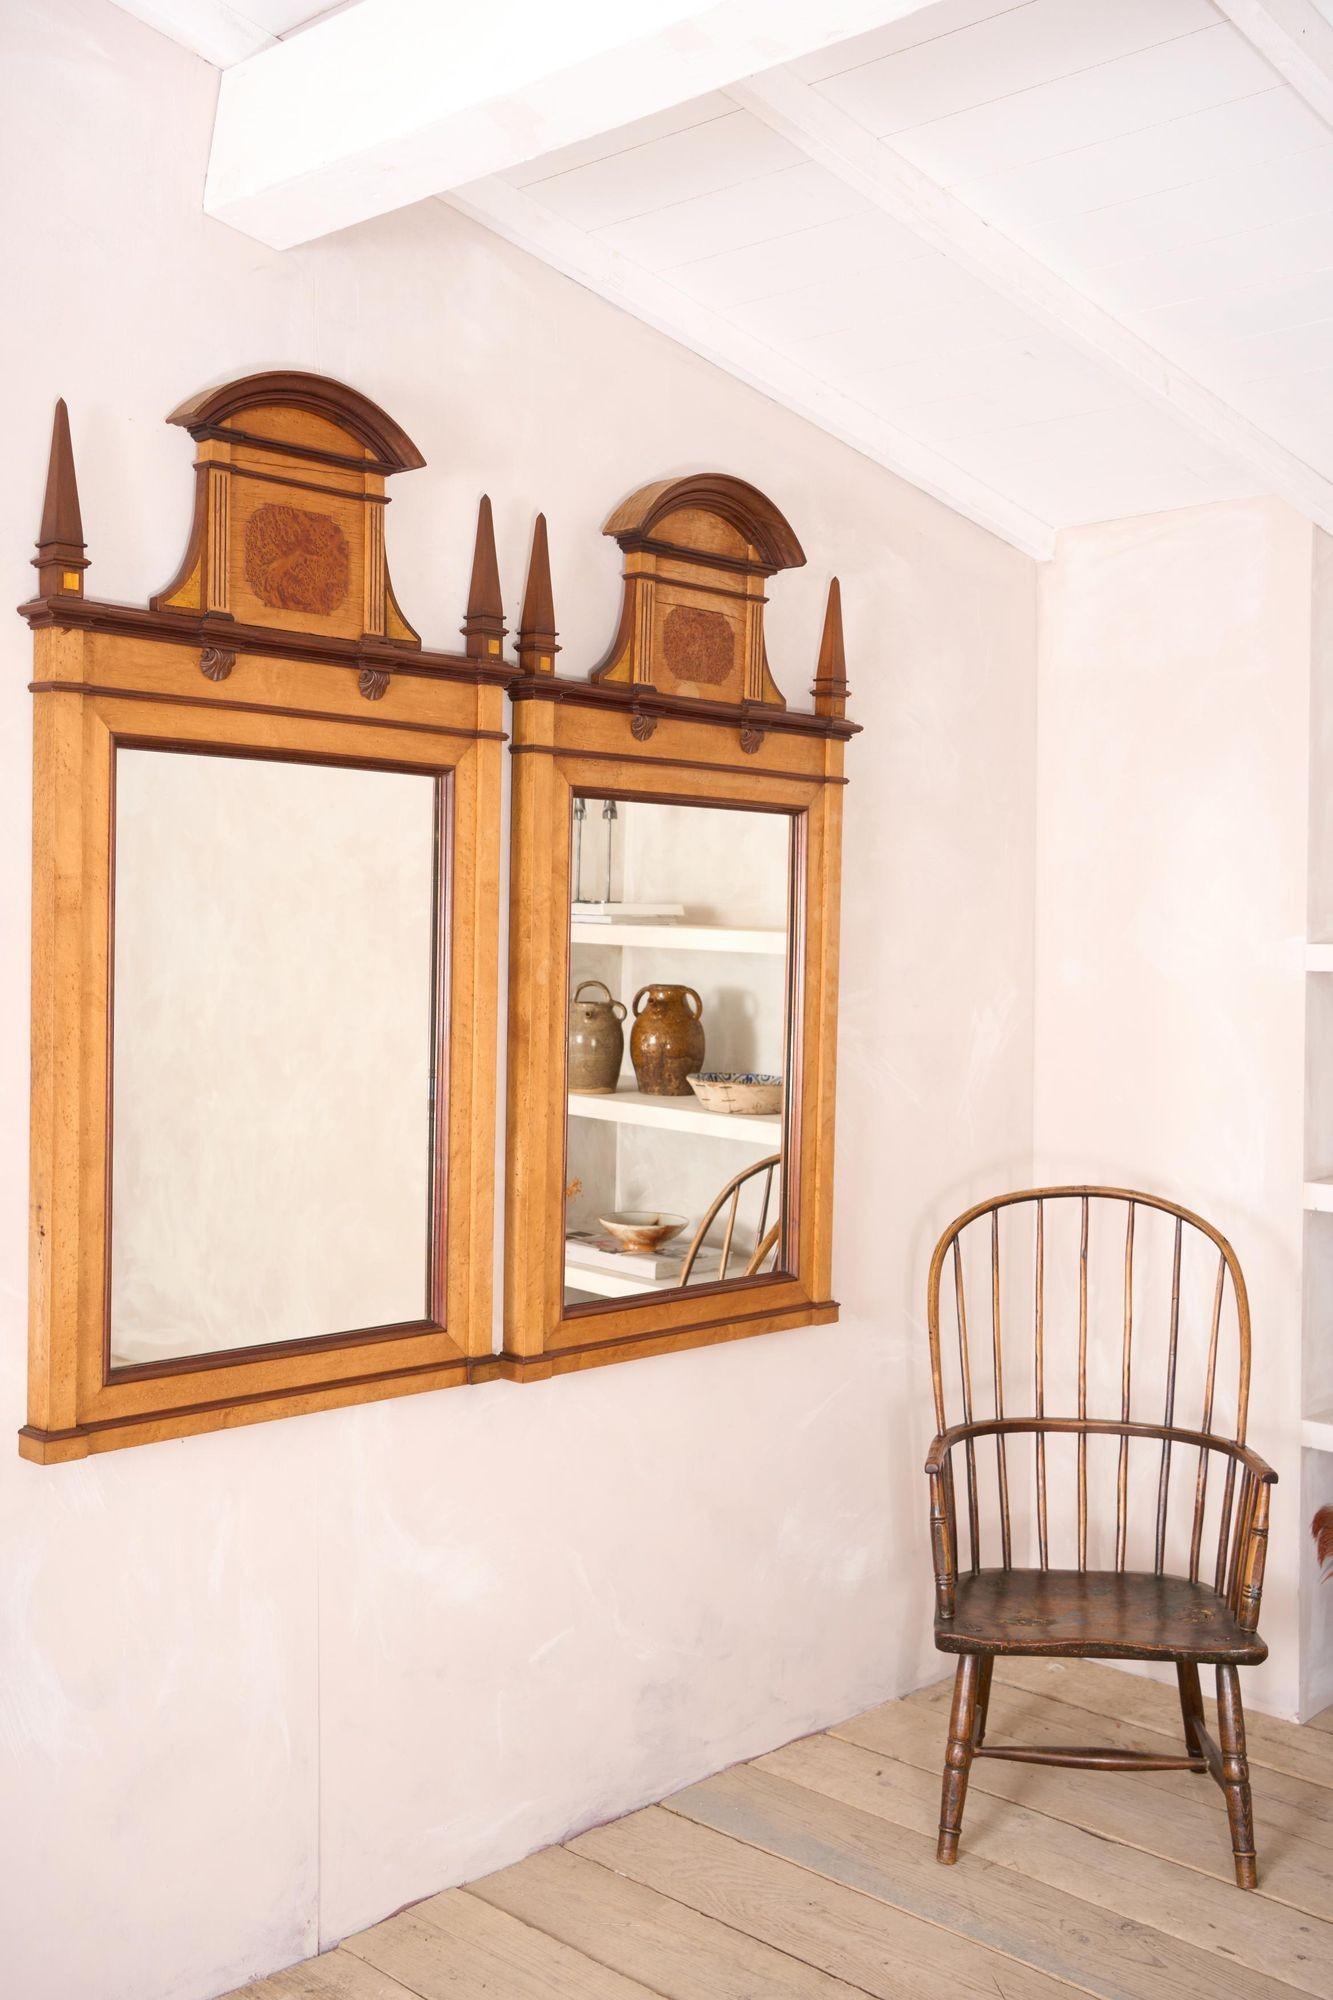 These are a striking pair of late 19th century Early 20th century Maple and walnut wall mirrors. Their design is elegant and would look incredible in a both modern and traditional interiors. These mirror are in honest aged condition with no major